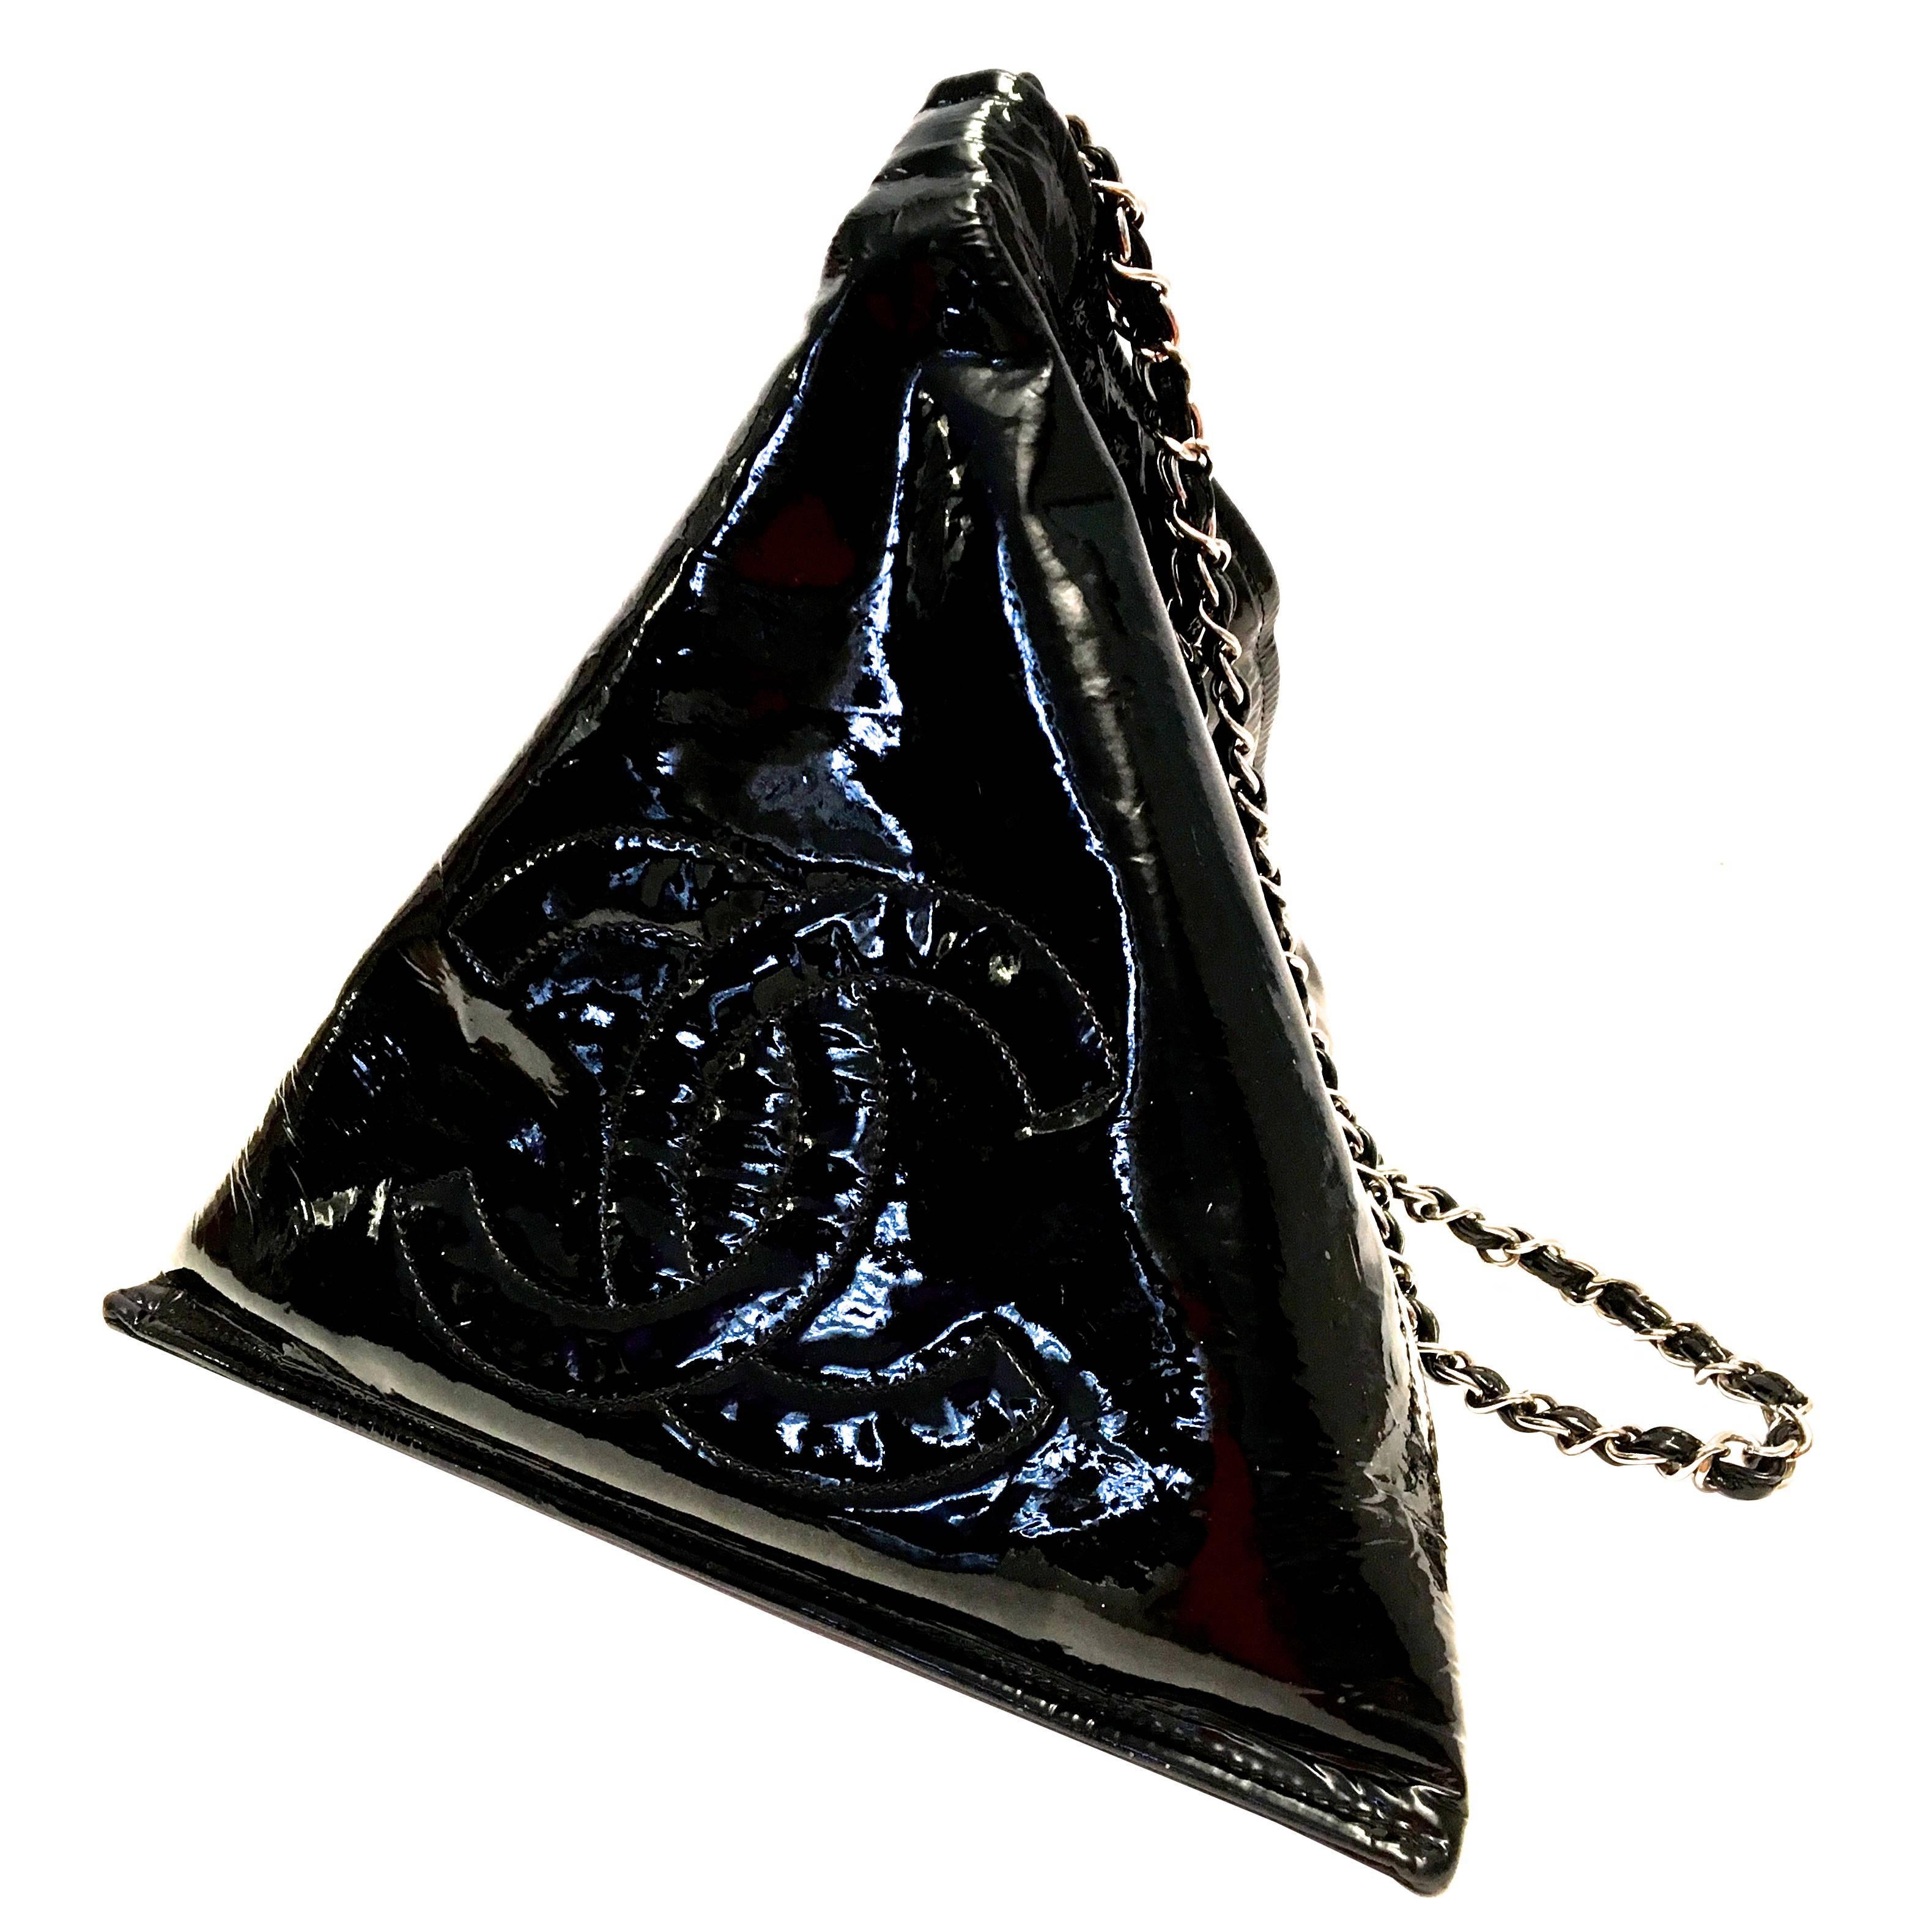 Extremely Rare Chanel Black Triangle Purse - 1980's